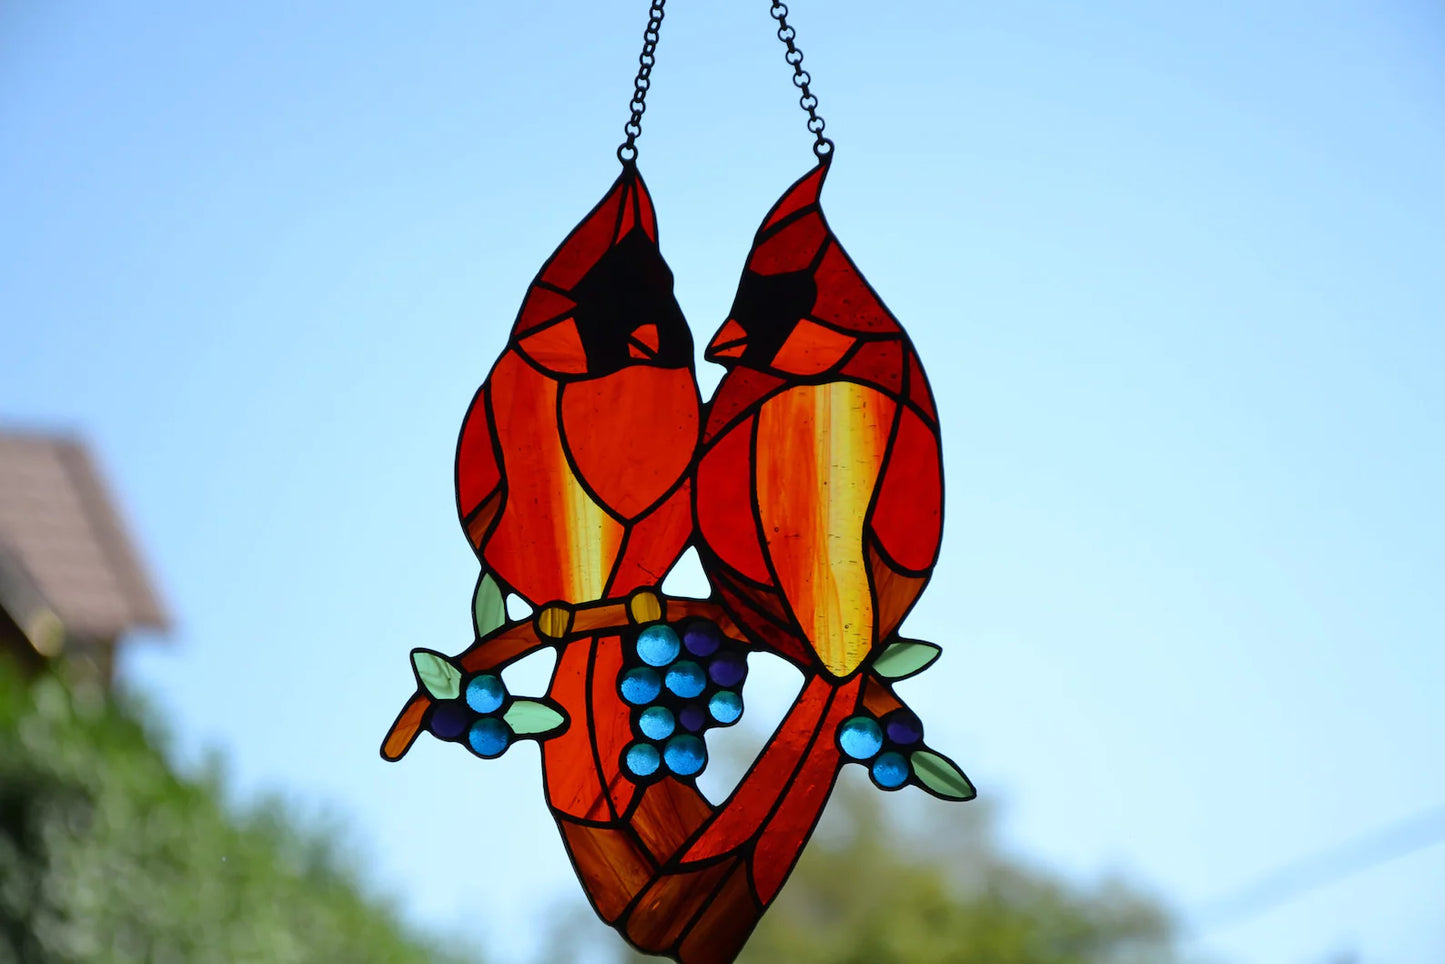 Suncatcher Stain glass hanging Сardinal Stained glass bird Wall decor Window hanging sun catcher Gift for mom Glass berries Fused glass